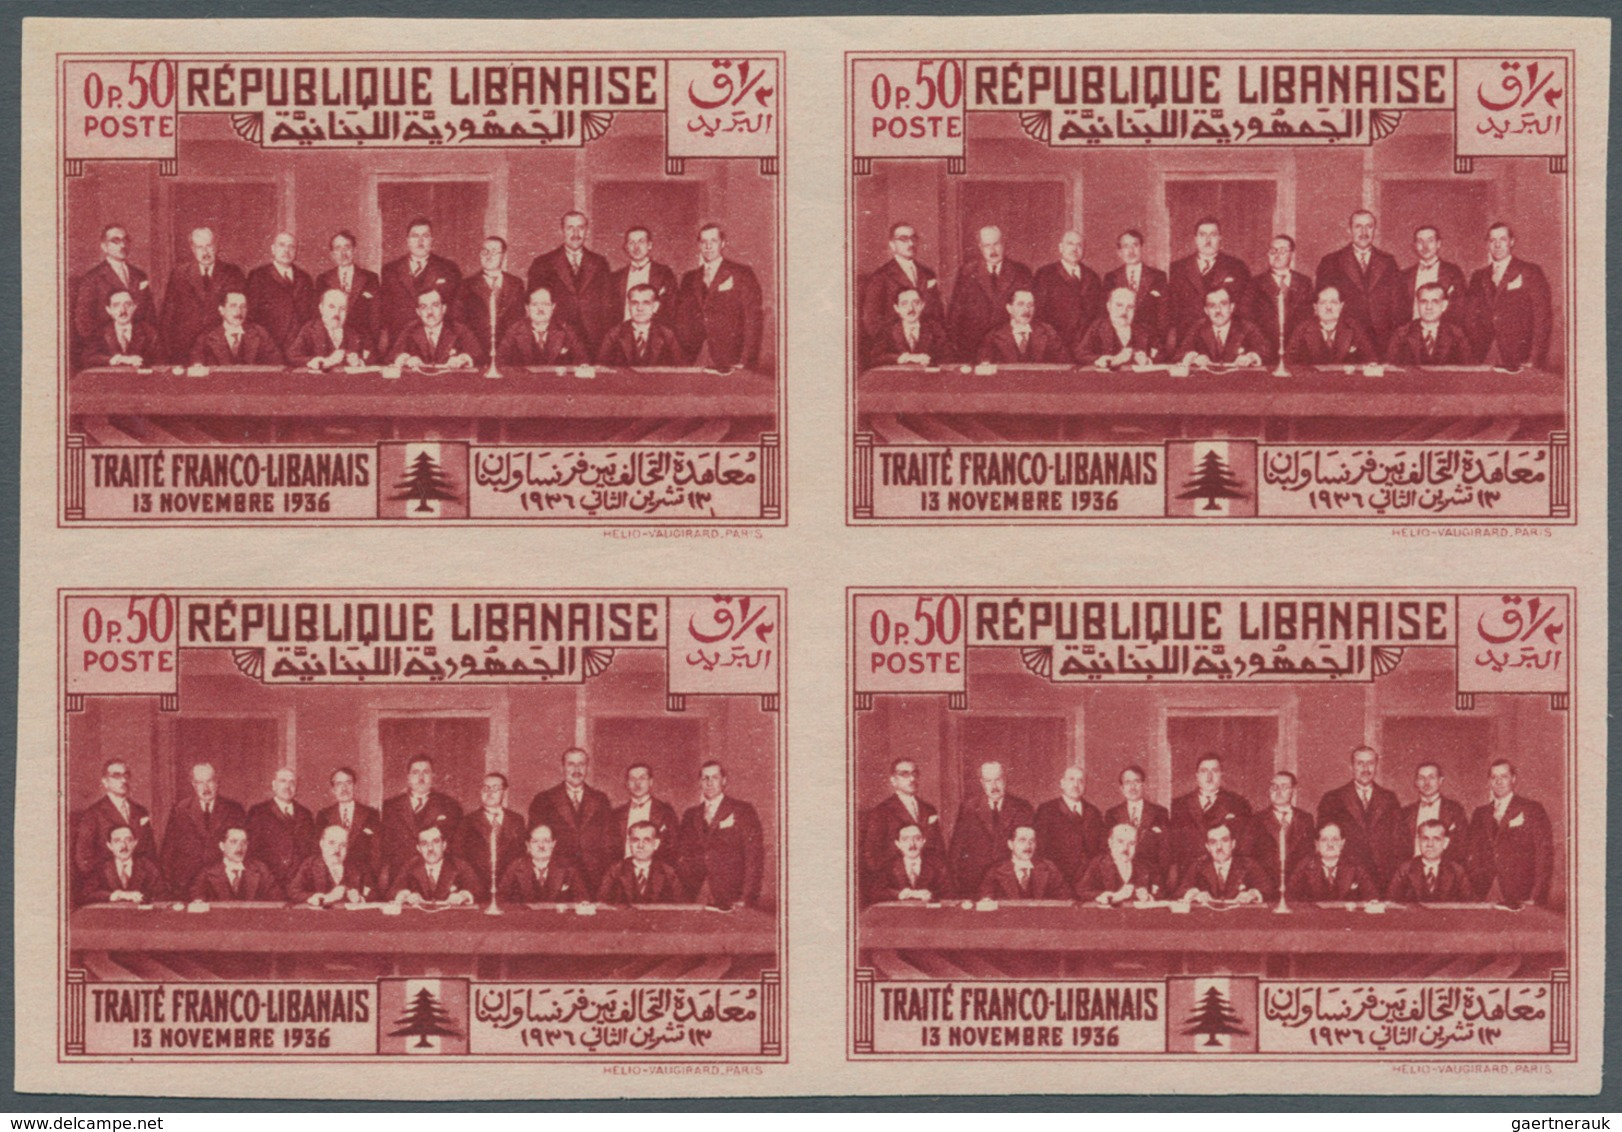 Libanon: 1936, Franco-Lebanese Treaty, not issued, complete set of five values as IMPERFORATE blocks